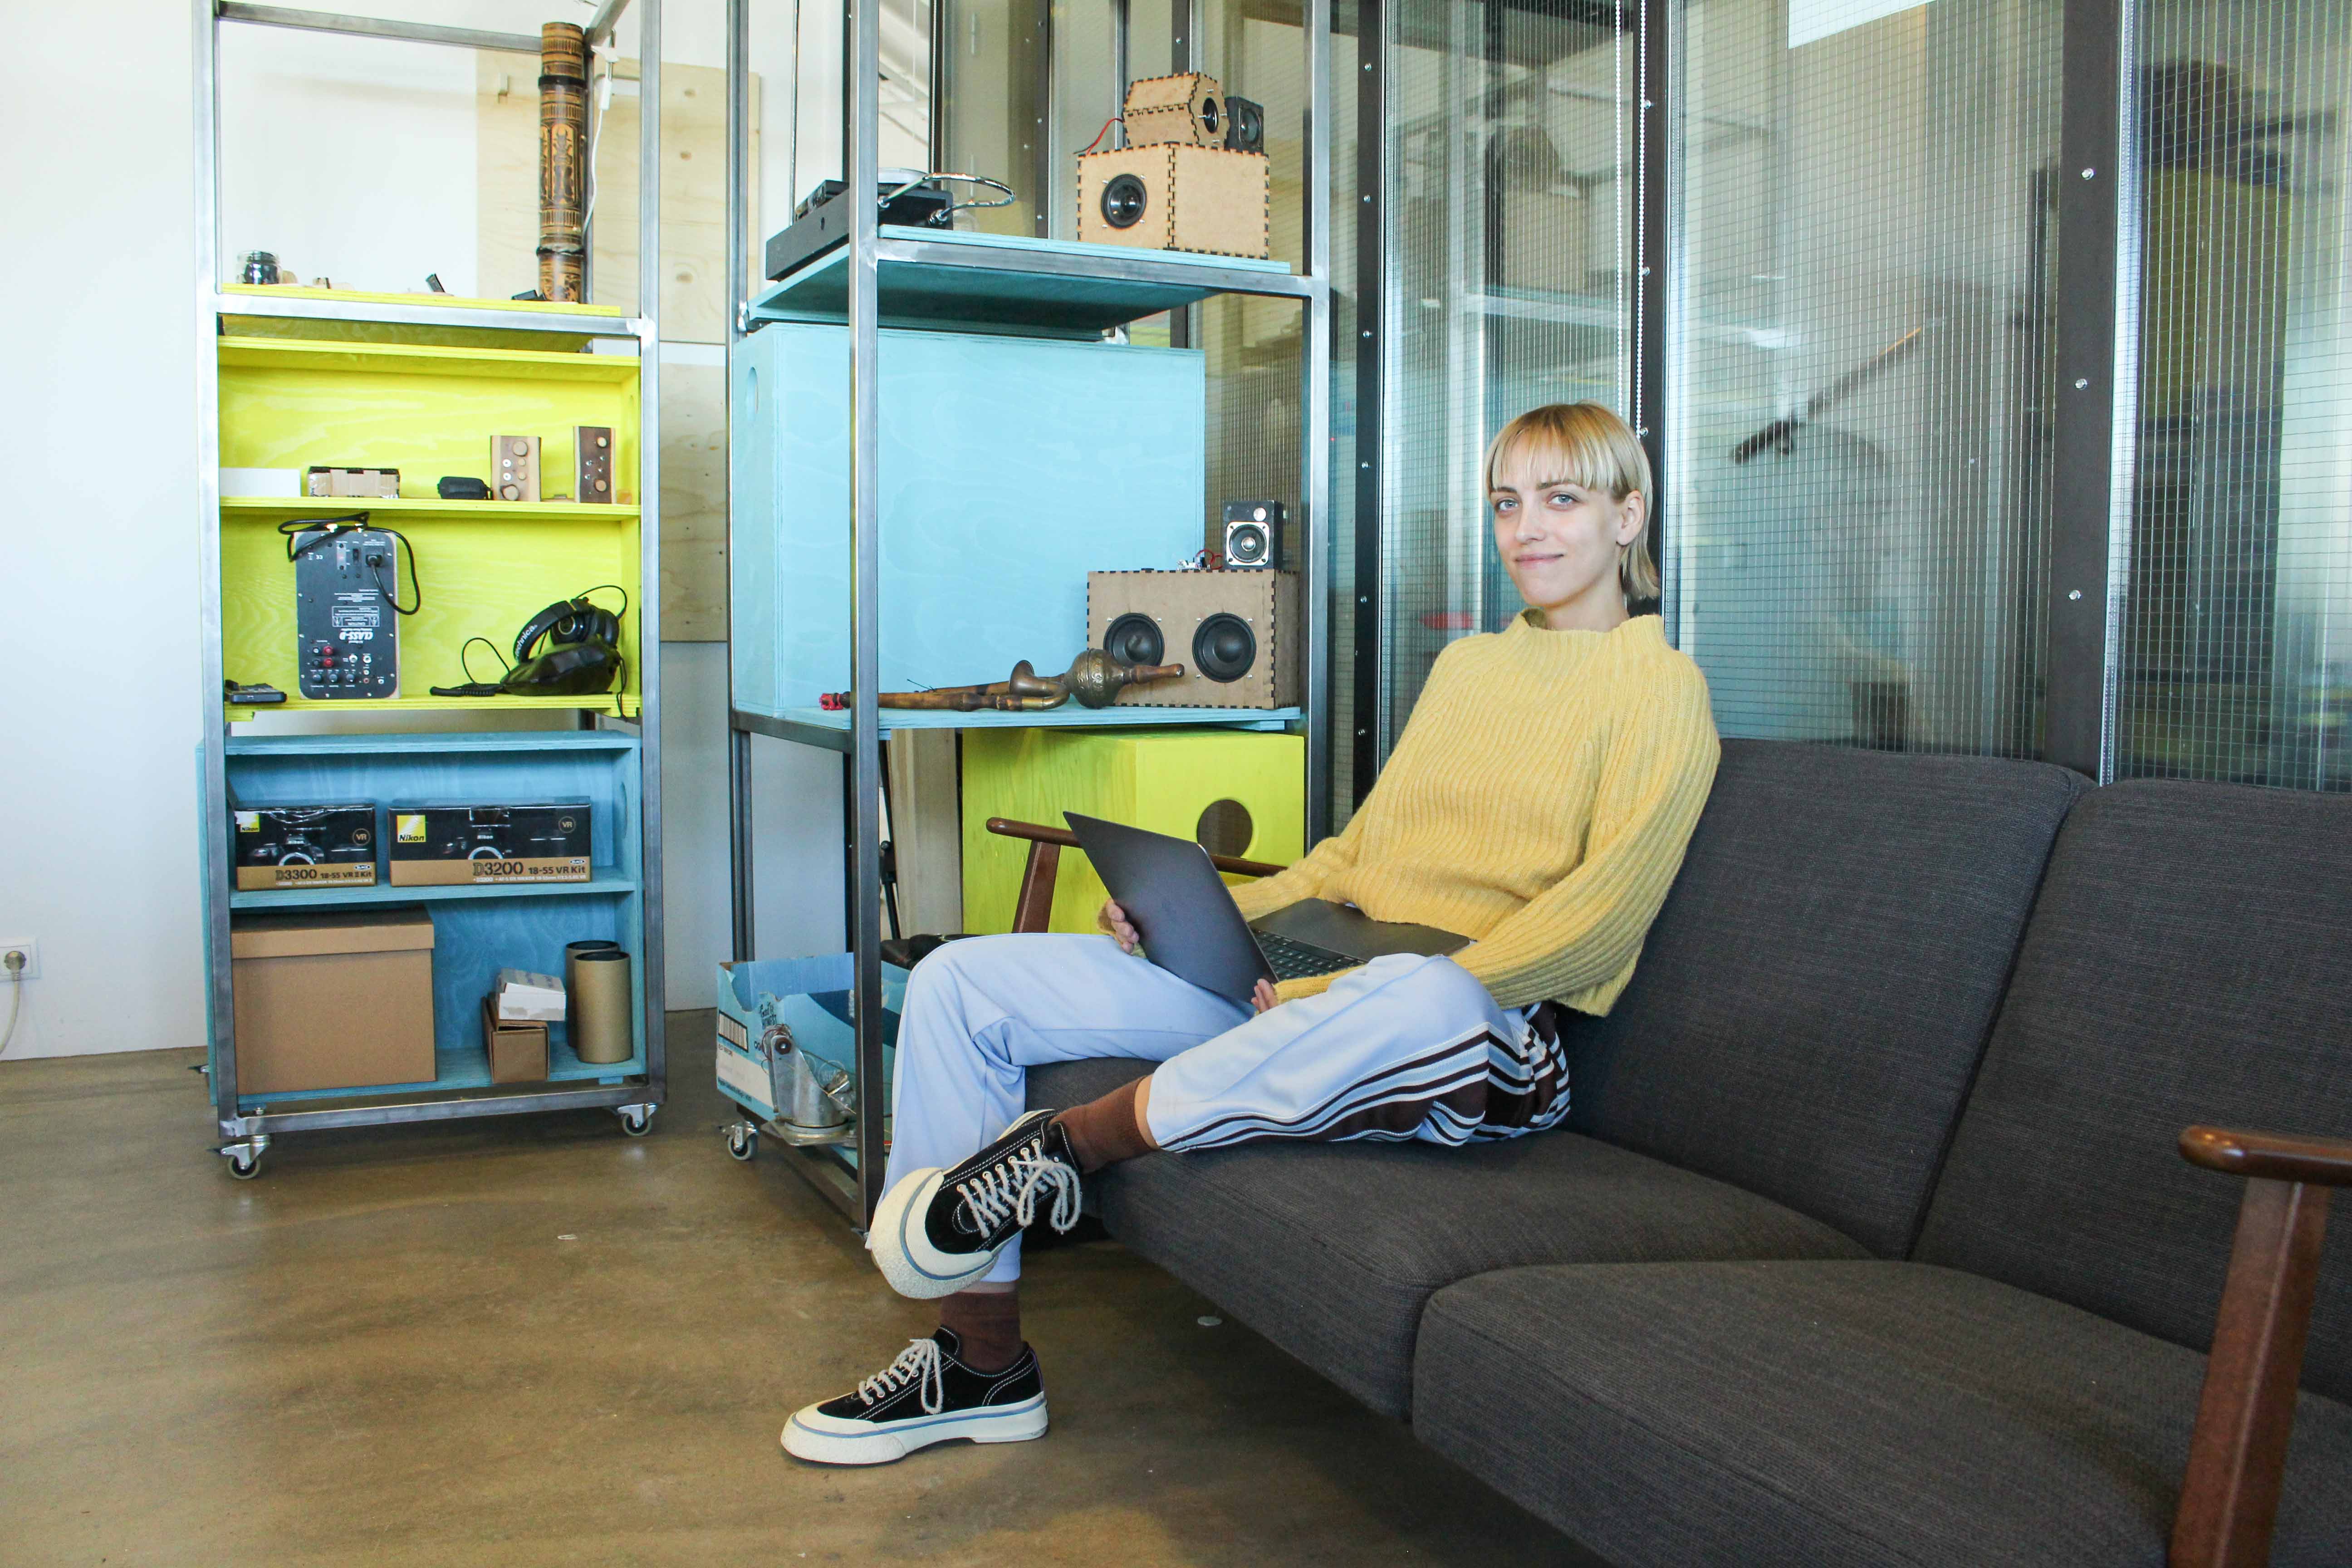 Young woman, dressed in casual yellow and blue clothing, sitting with a laptop in a dark sofa next to yellow and blue shelves.